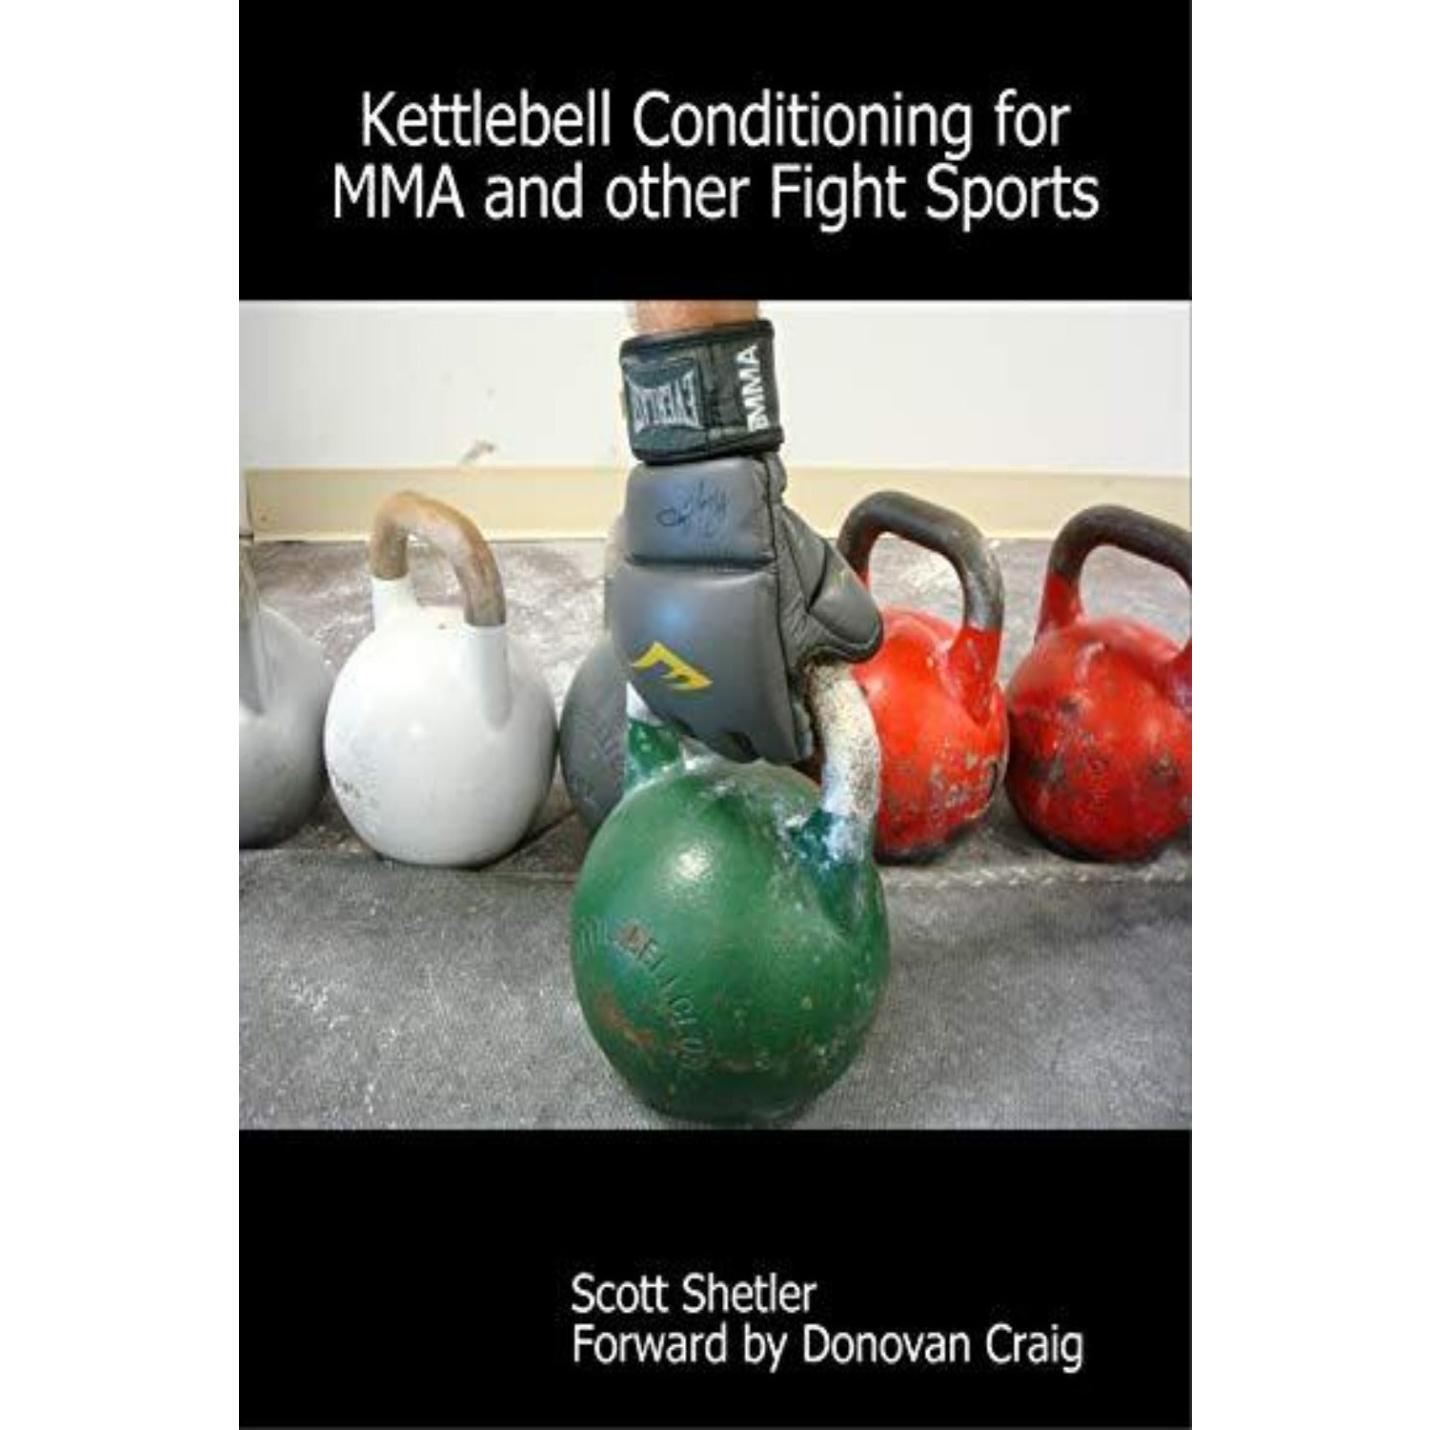 Kettlebell Conditioning for MMA and Other Fight Sports - happygetfit.com